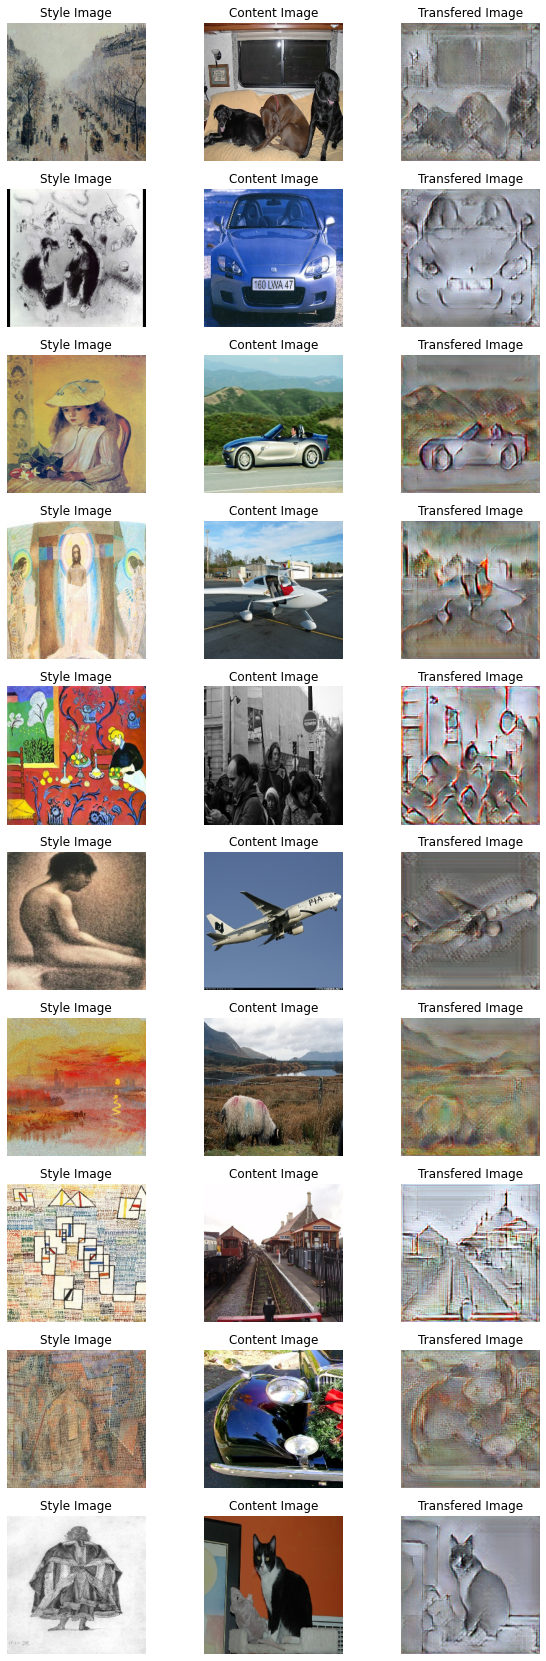 Style transfer sample gallery